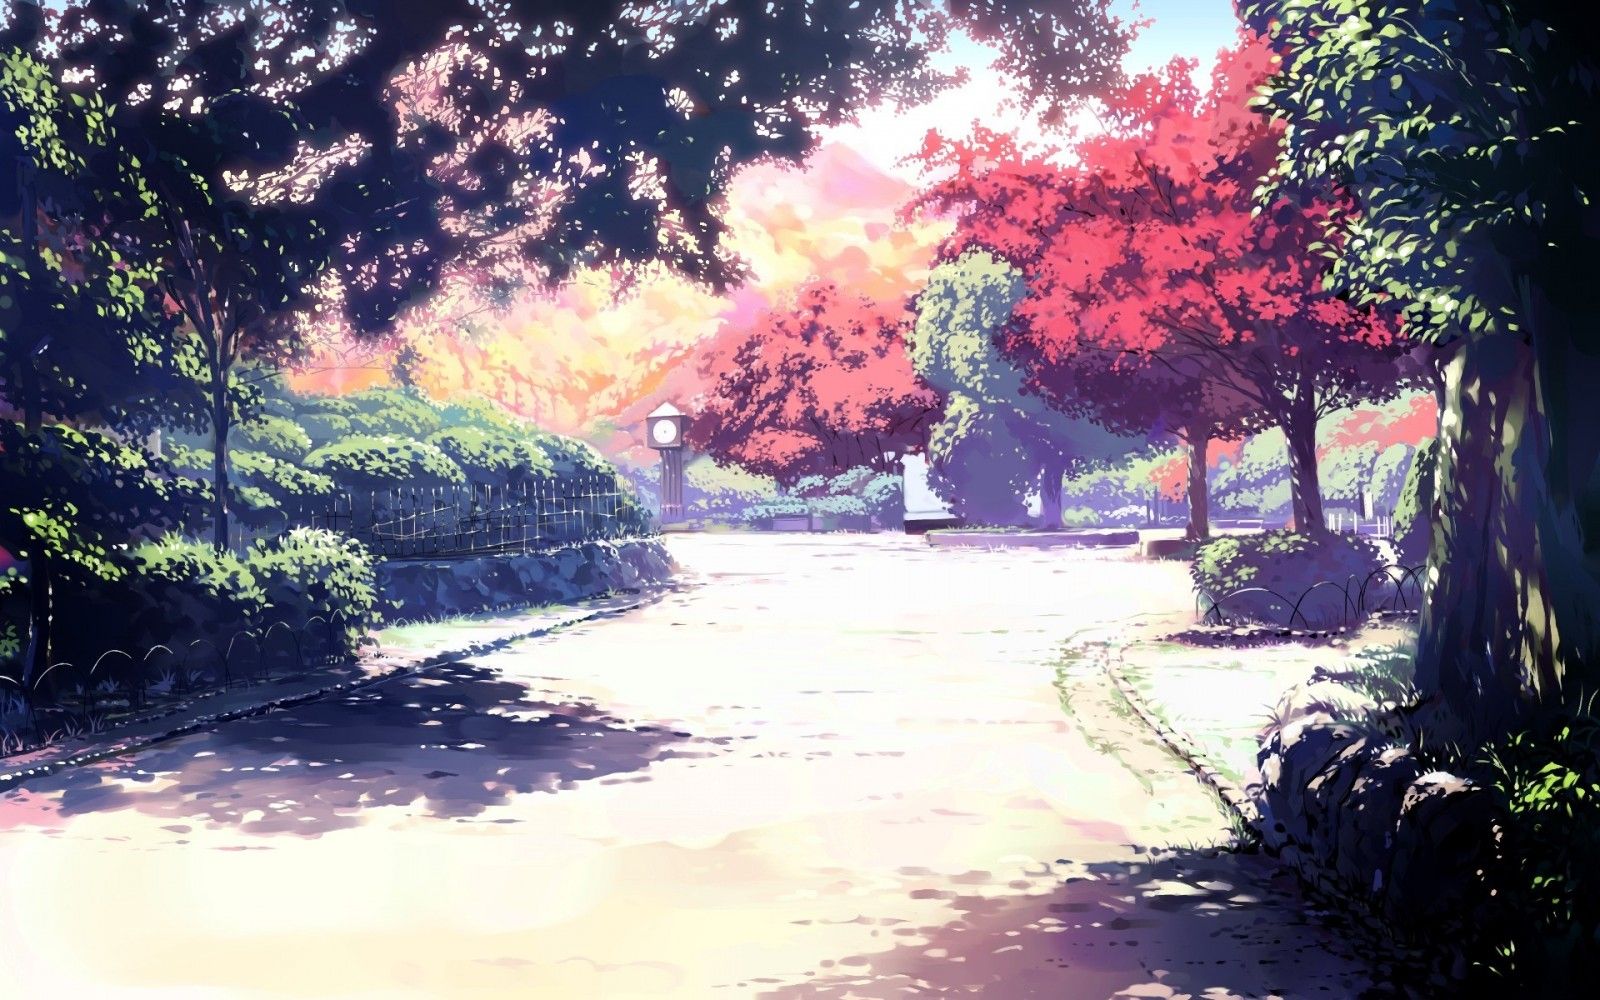 Wallpaper, sunlight, landscape, anime, water, nature, reflection, grass, sky, winter, Spirited Away, branch, evening, morning, river, spring, Bank, tree, autumn, leaf, plant, watercourse, 1920x1200 px, bayou, computer wallpaper, phenomenon 1920x1200